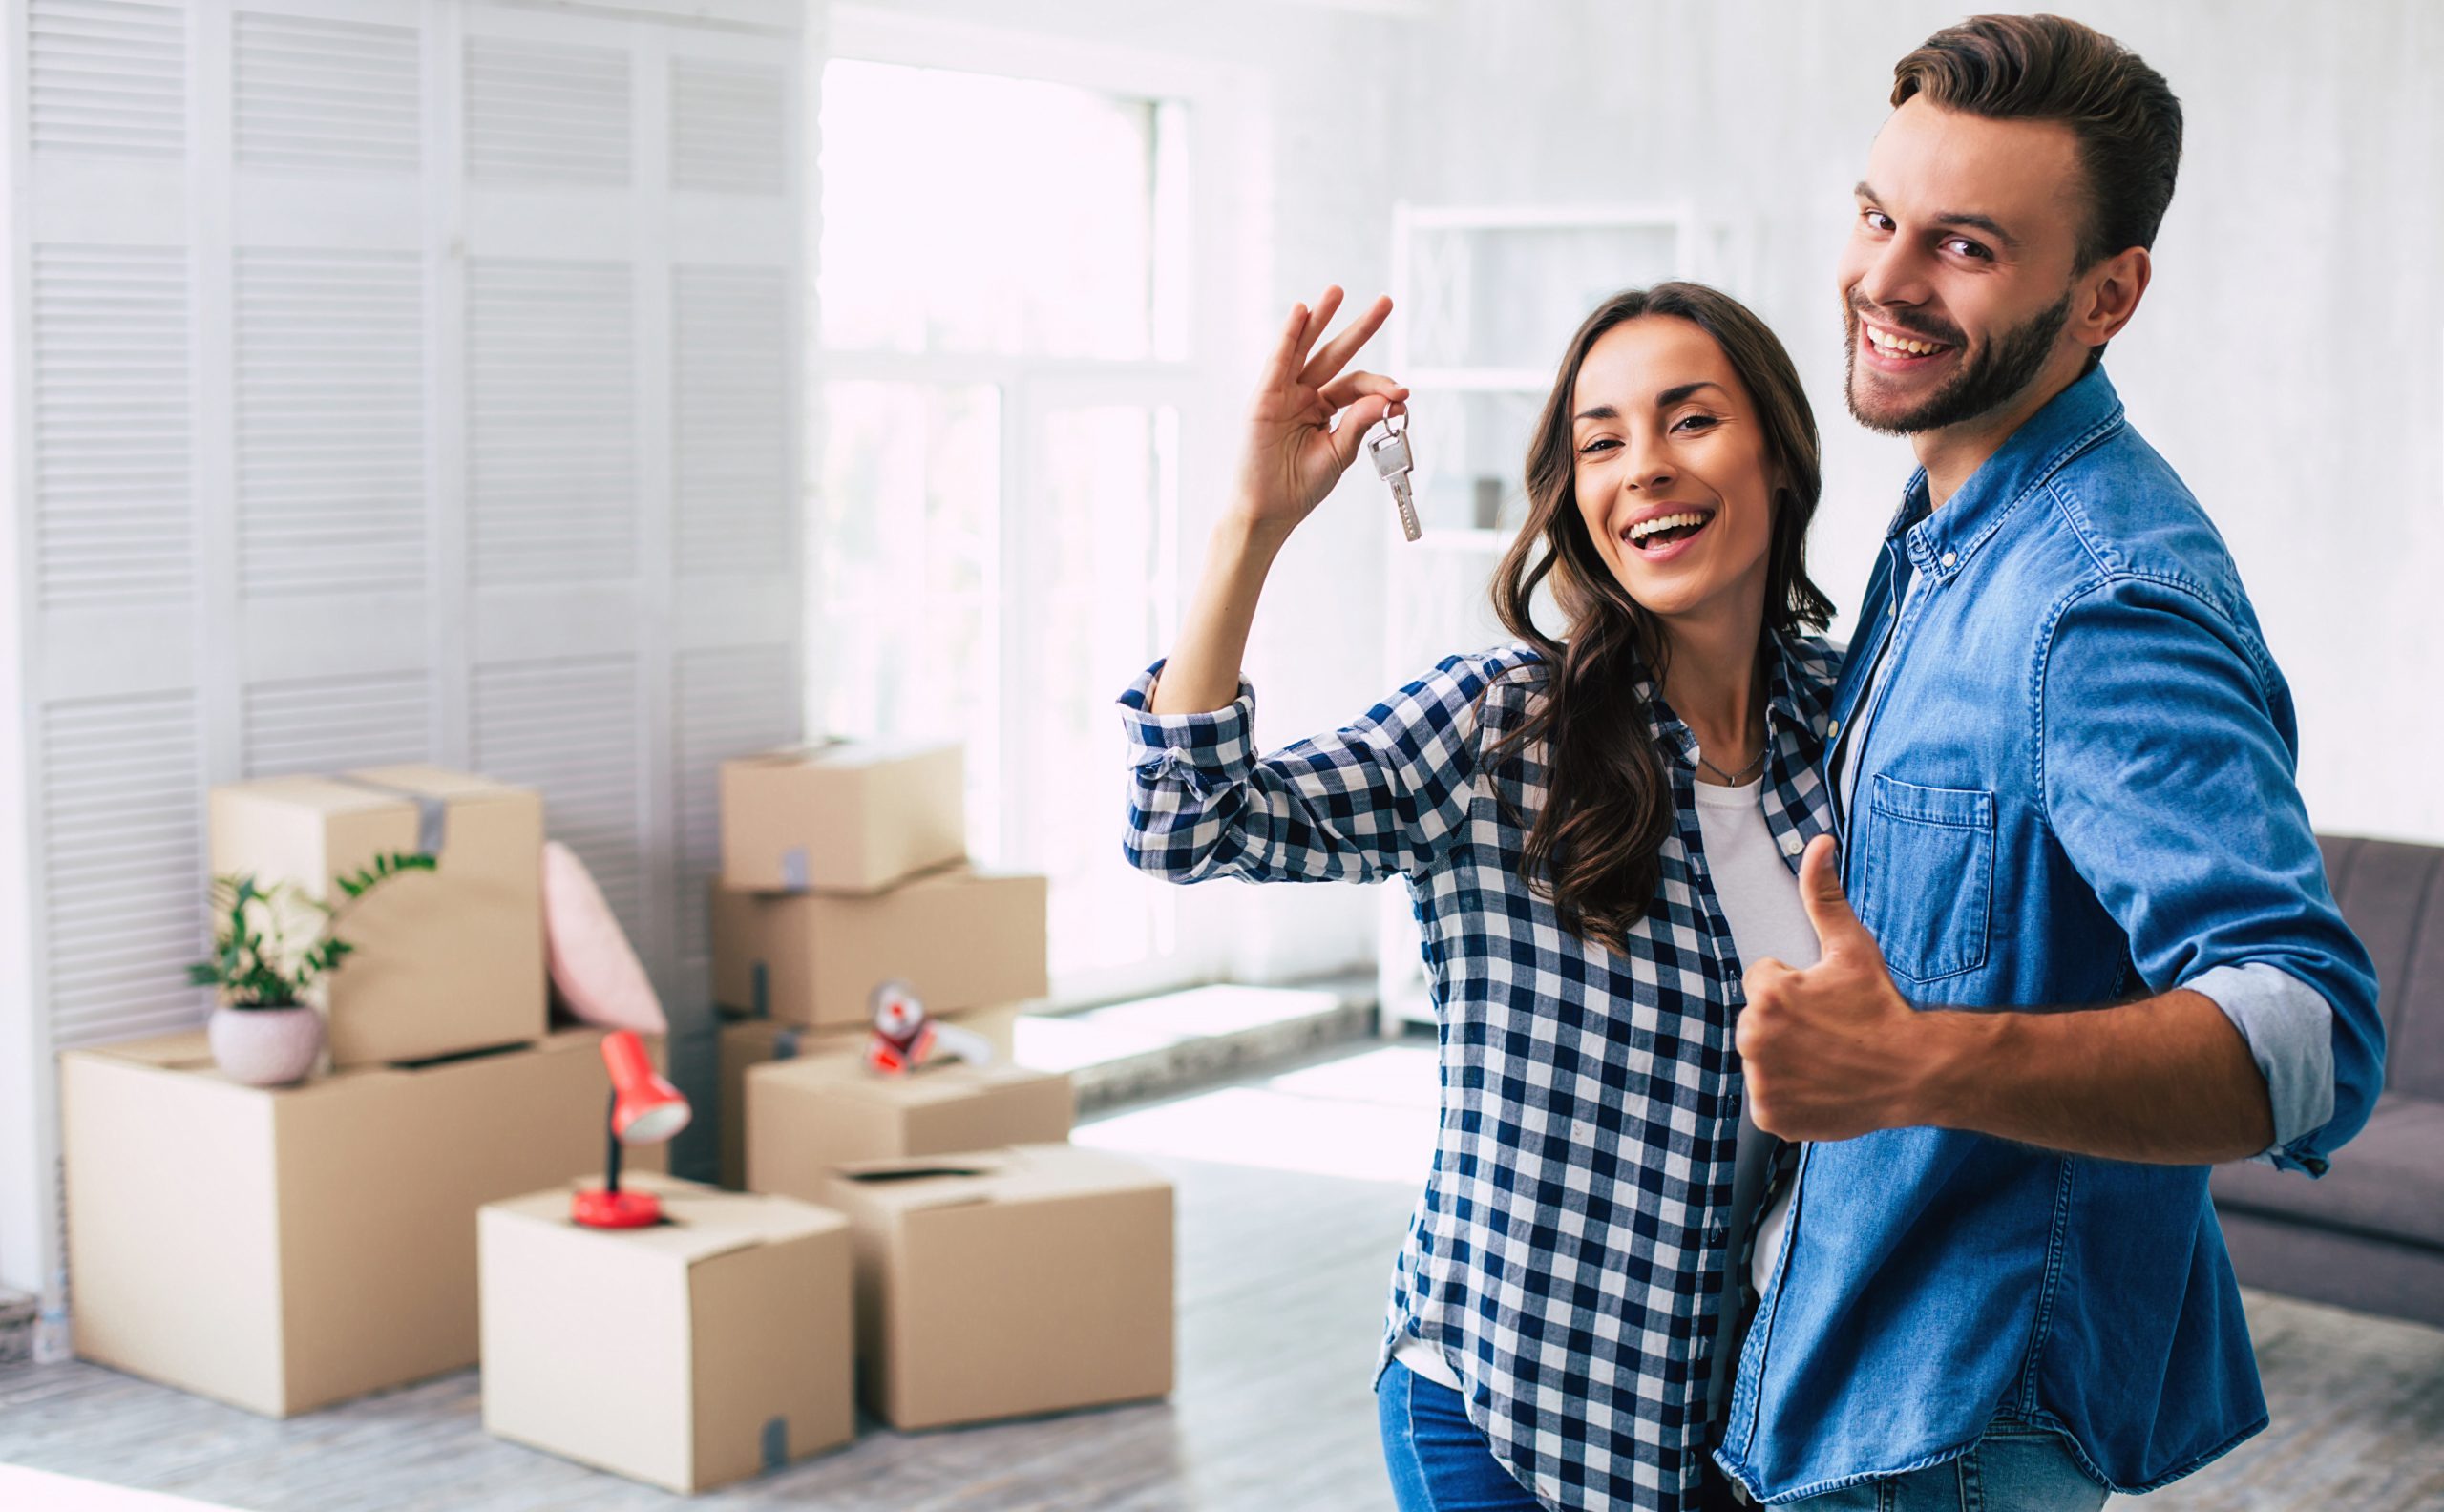 Top 10 tips for moving home